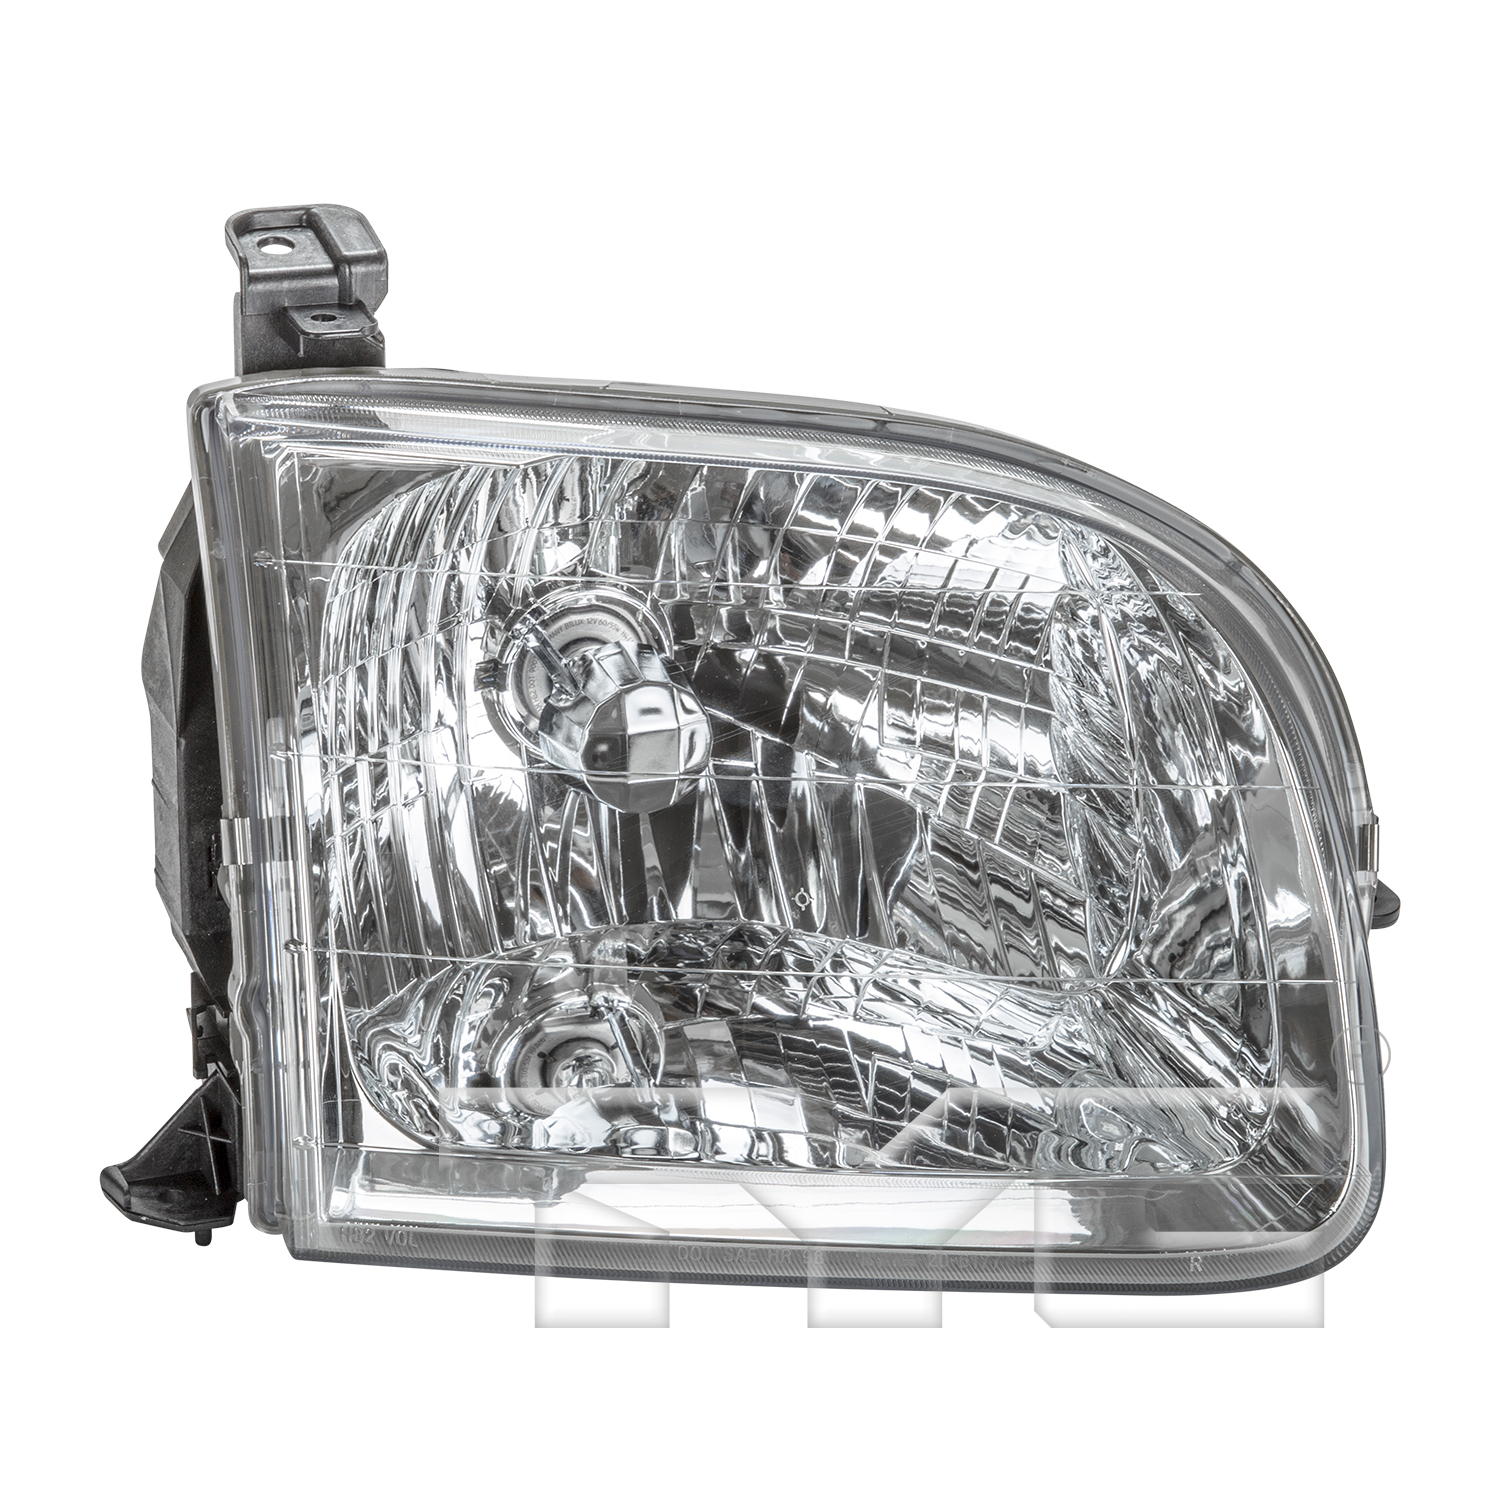 Aftermarket HEADLIGHTS for TOYOTA - SEQUOIA, SEQUOIA,01-04,RT Headlamp assy composite